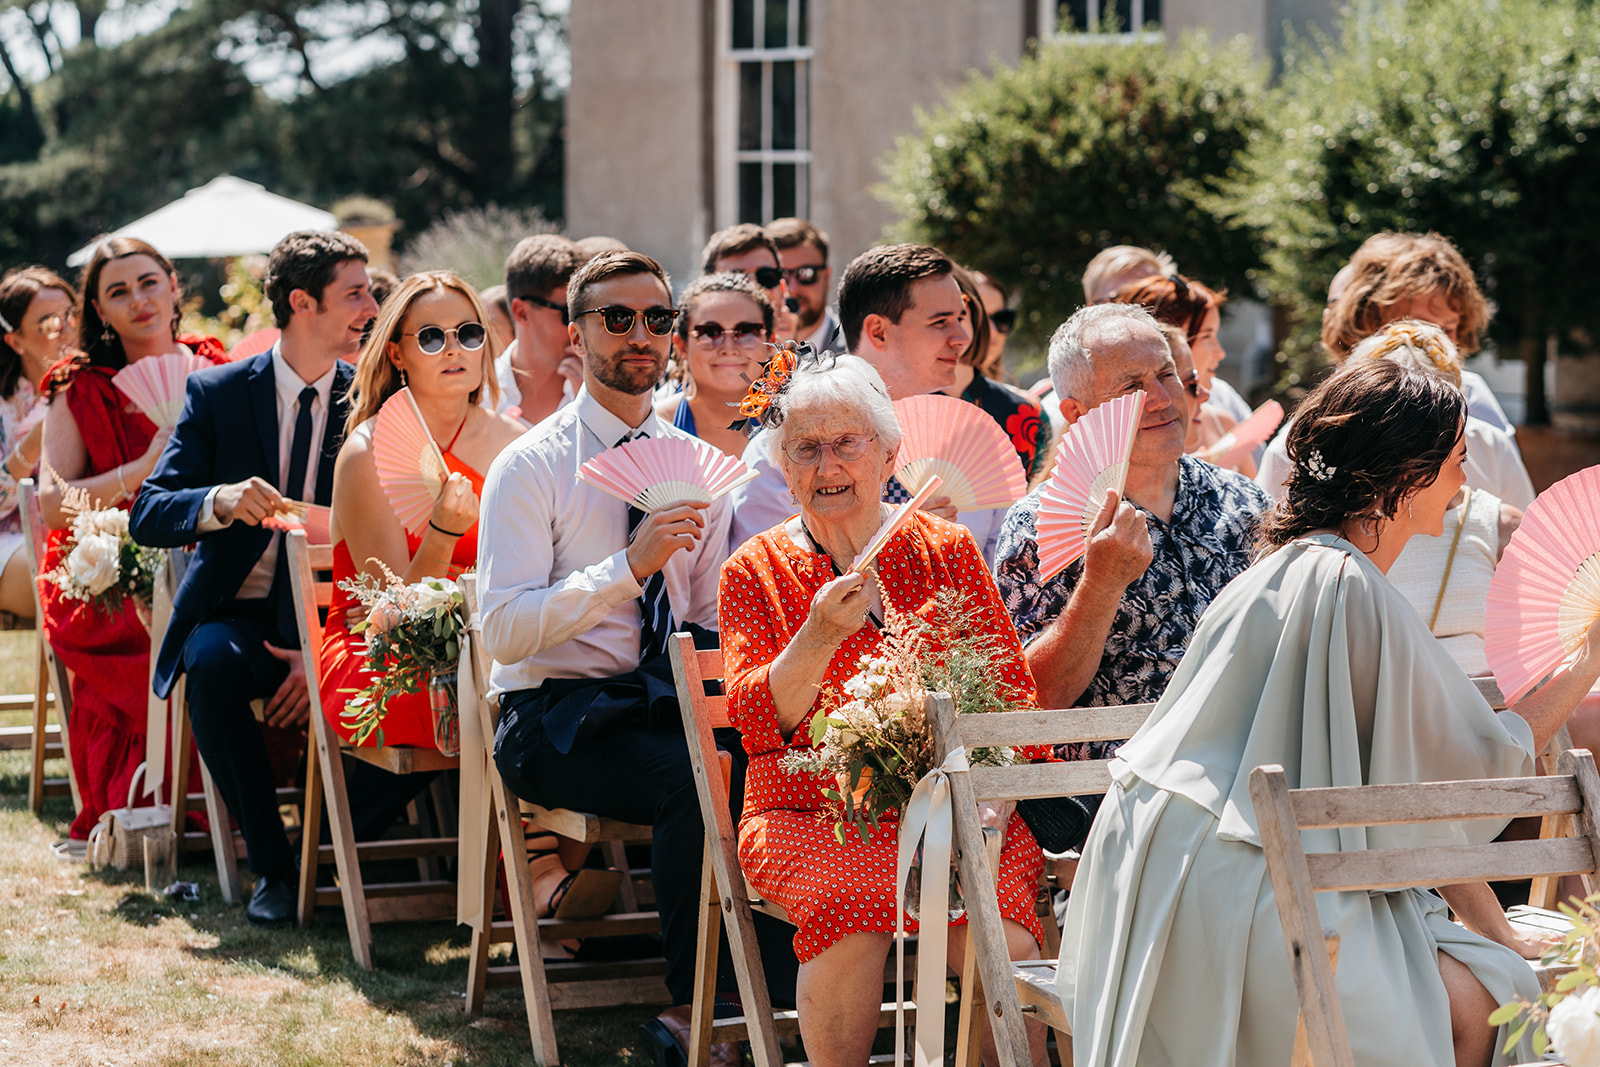 Guests enjoying the wedding ceremony in the sunshine